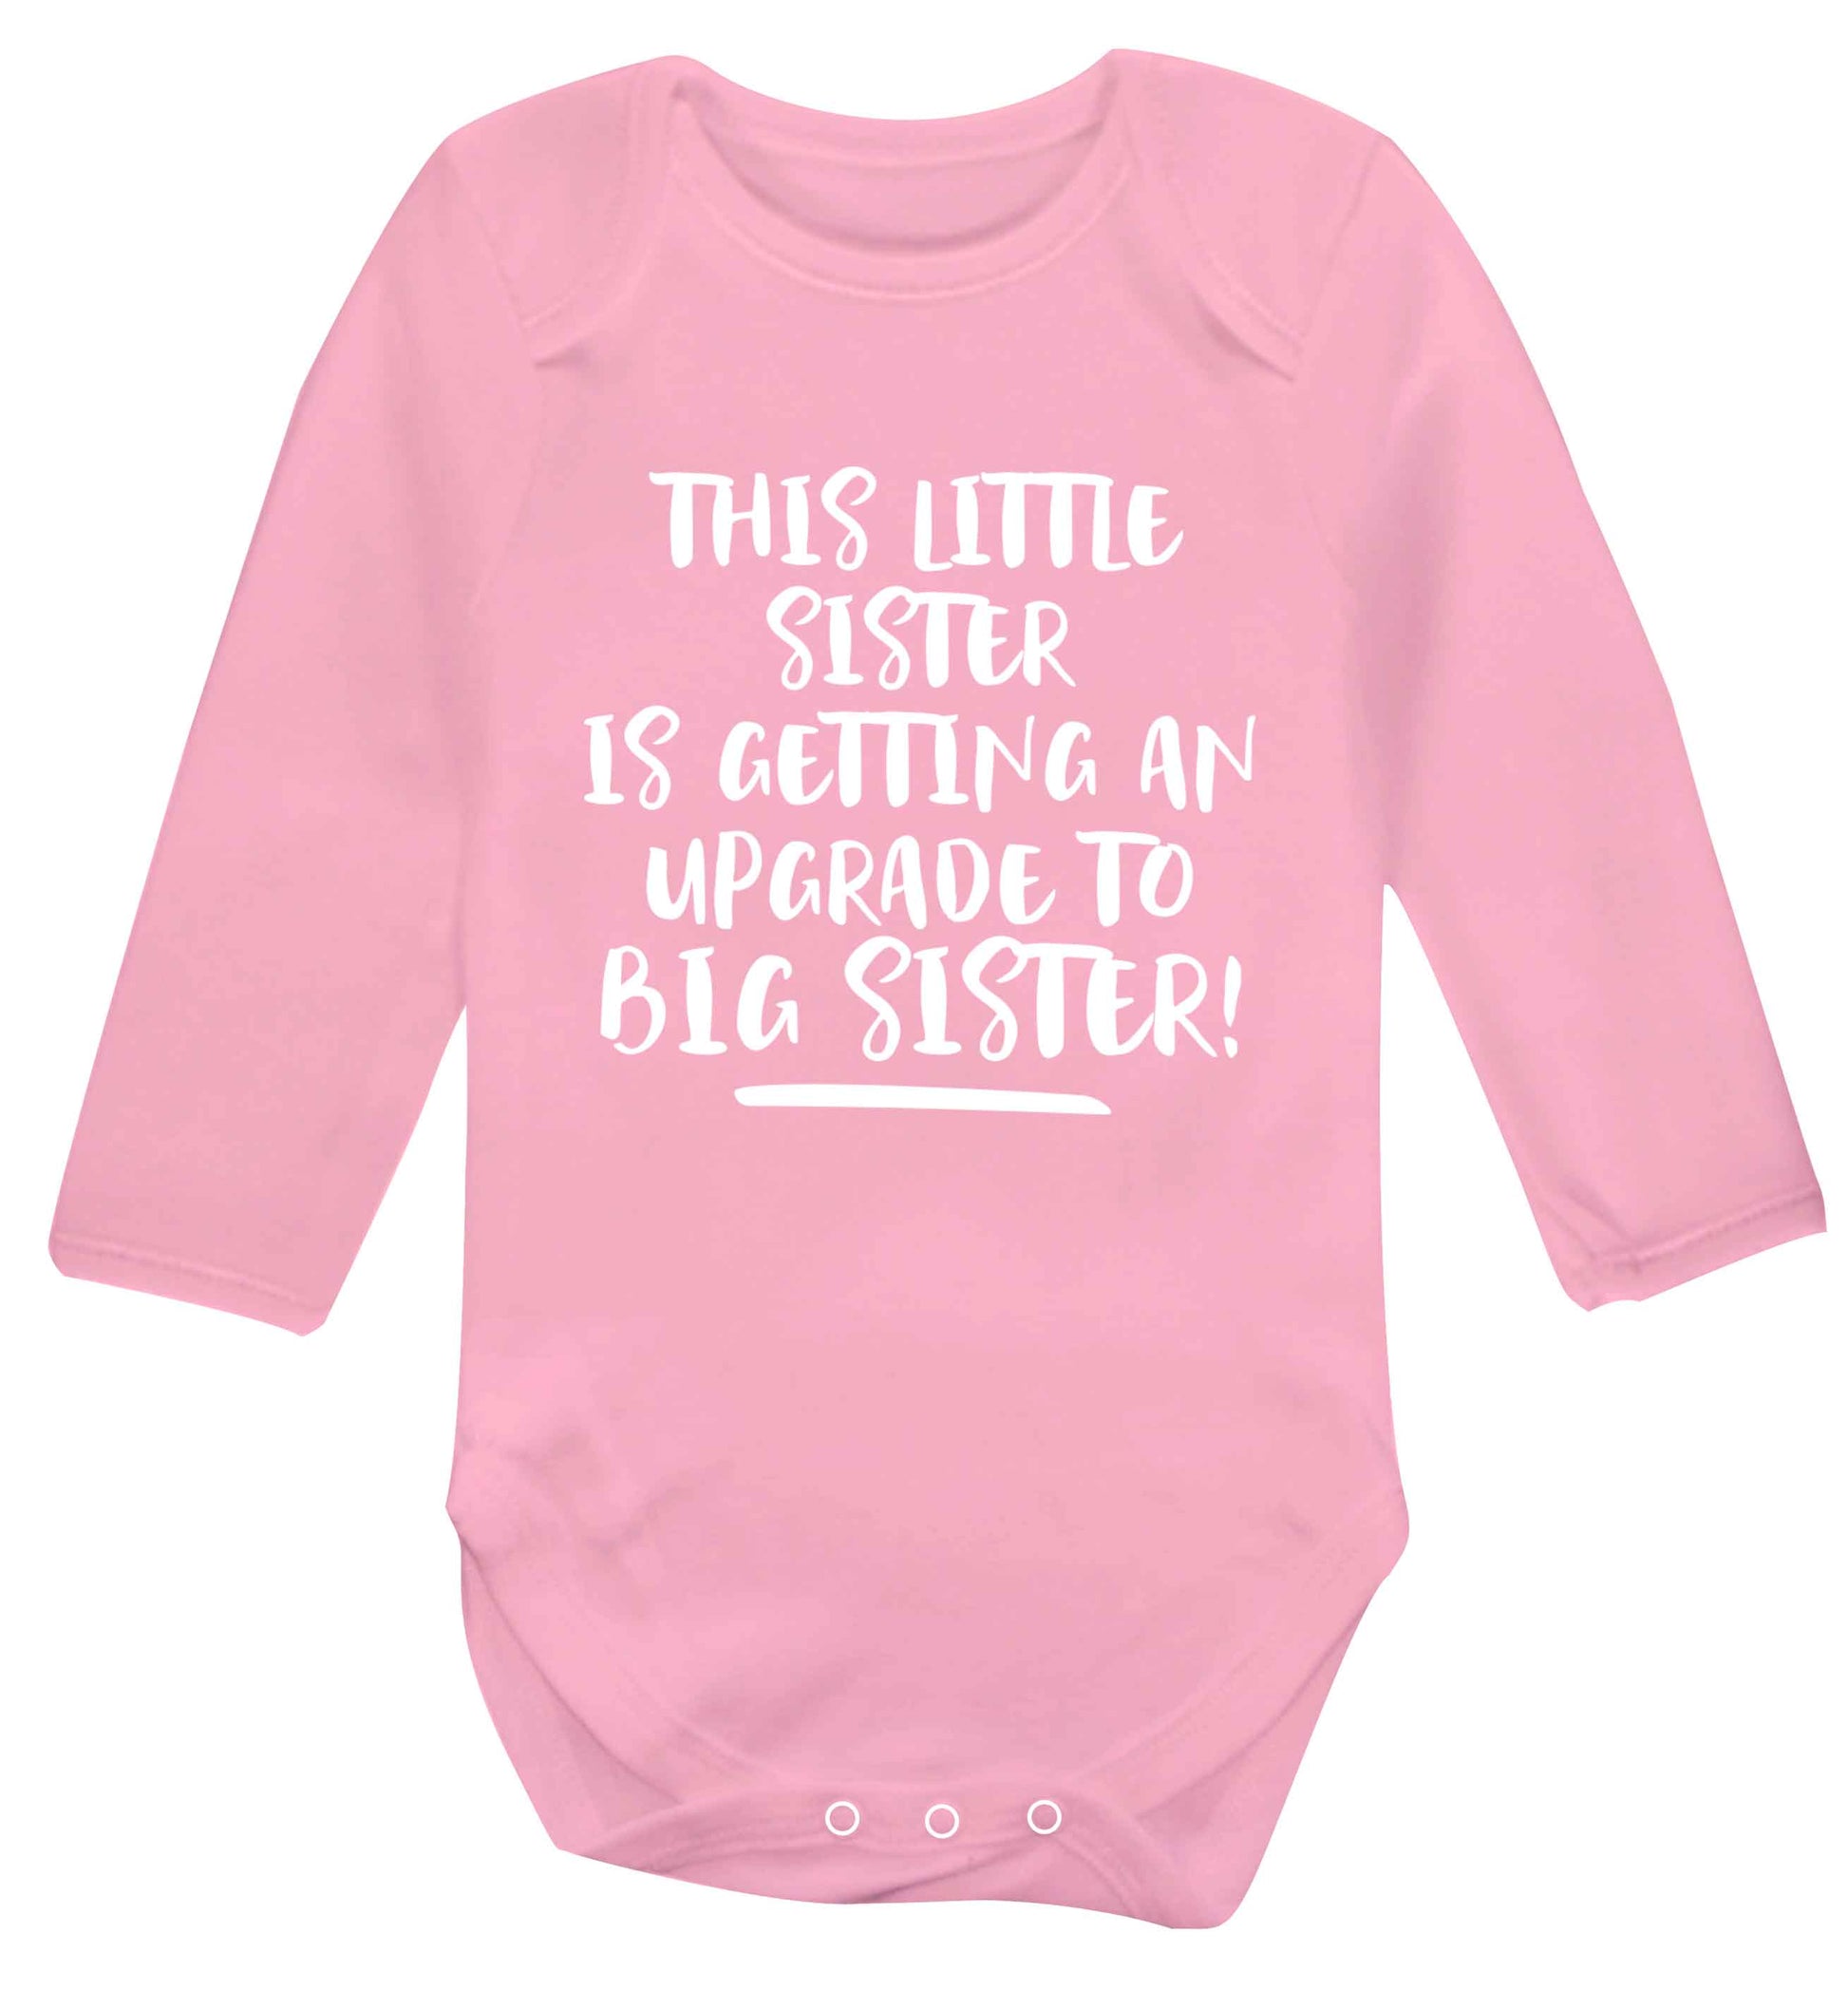 This little sister is getting an upgrade to big sister! Baby Vest long sleeved pale pink 6-12 months